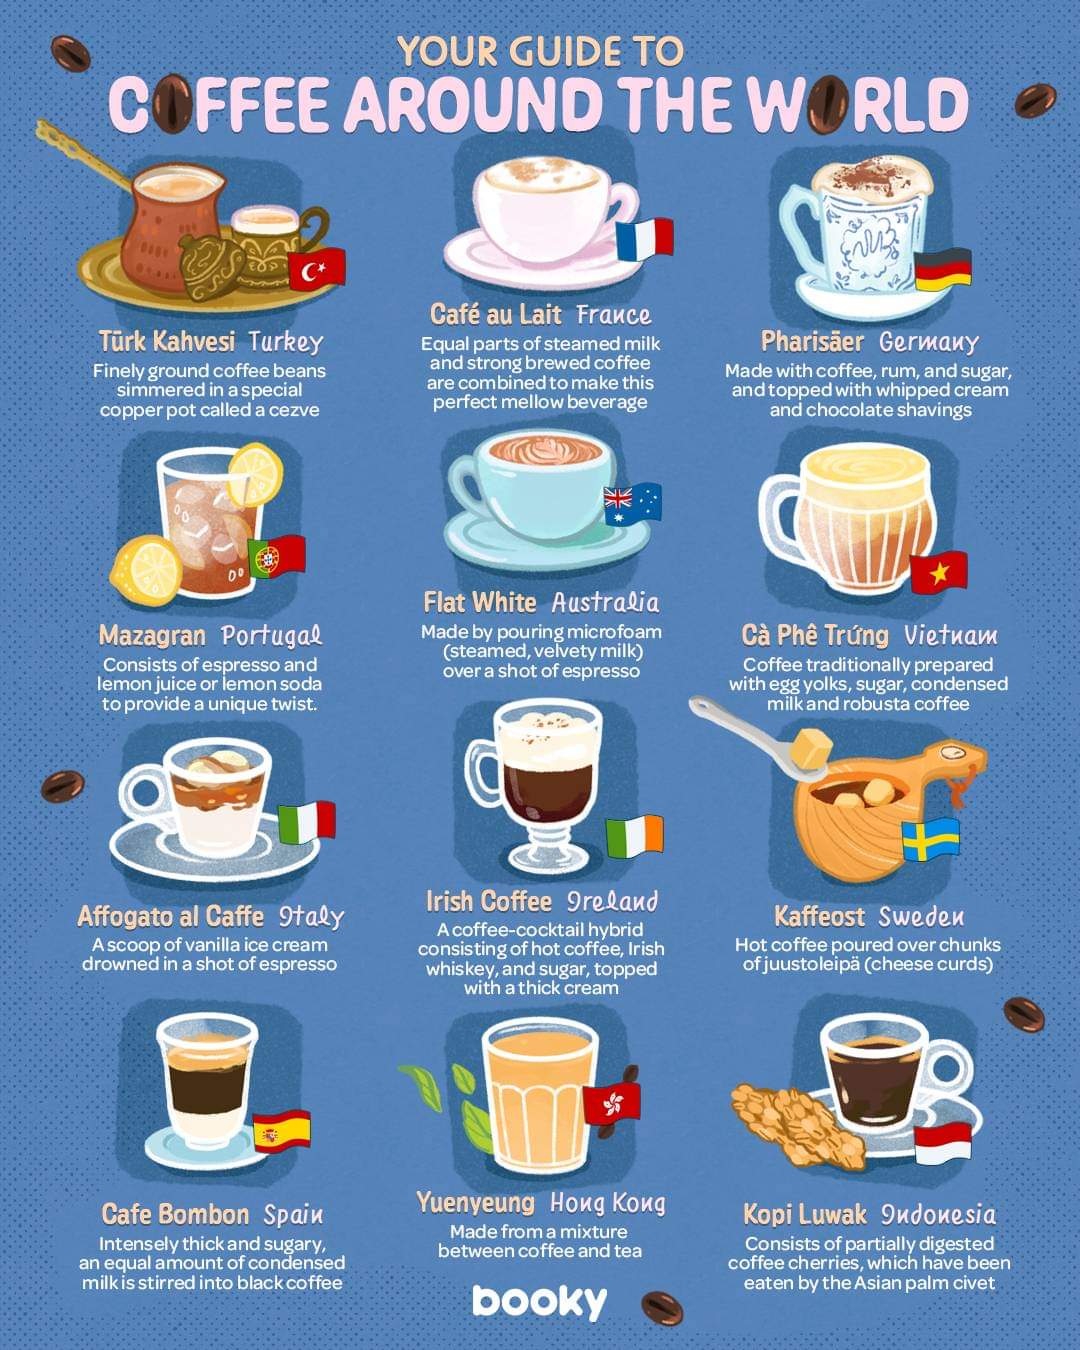 The Guide To Coffee In 12 Countries In The World